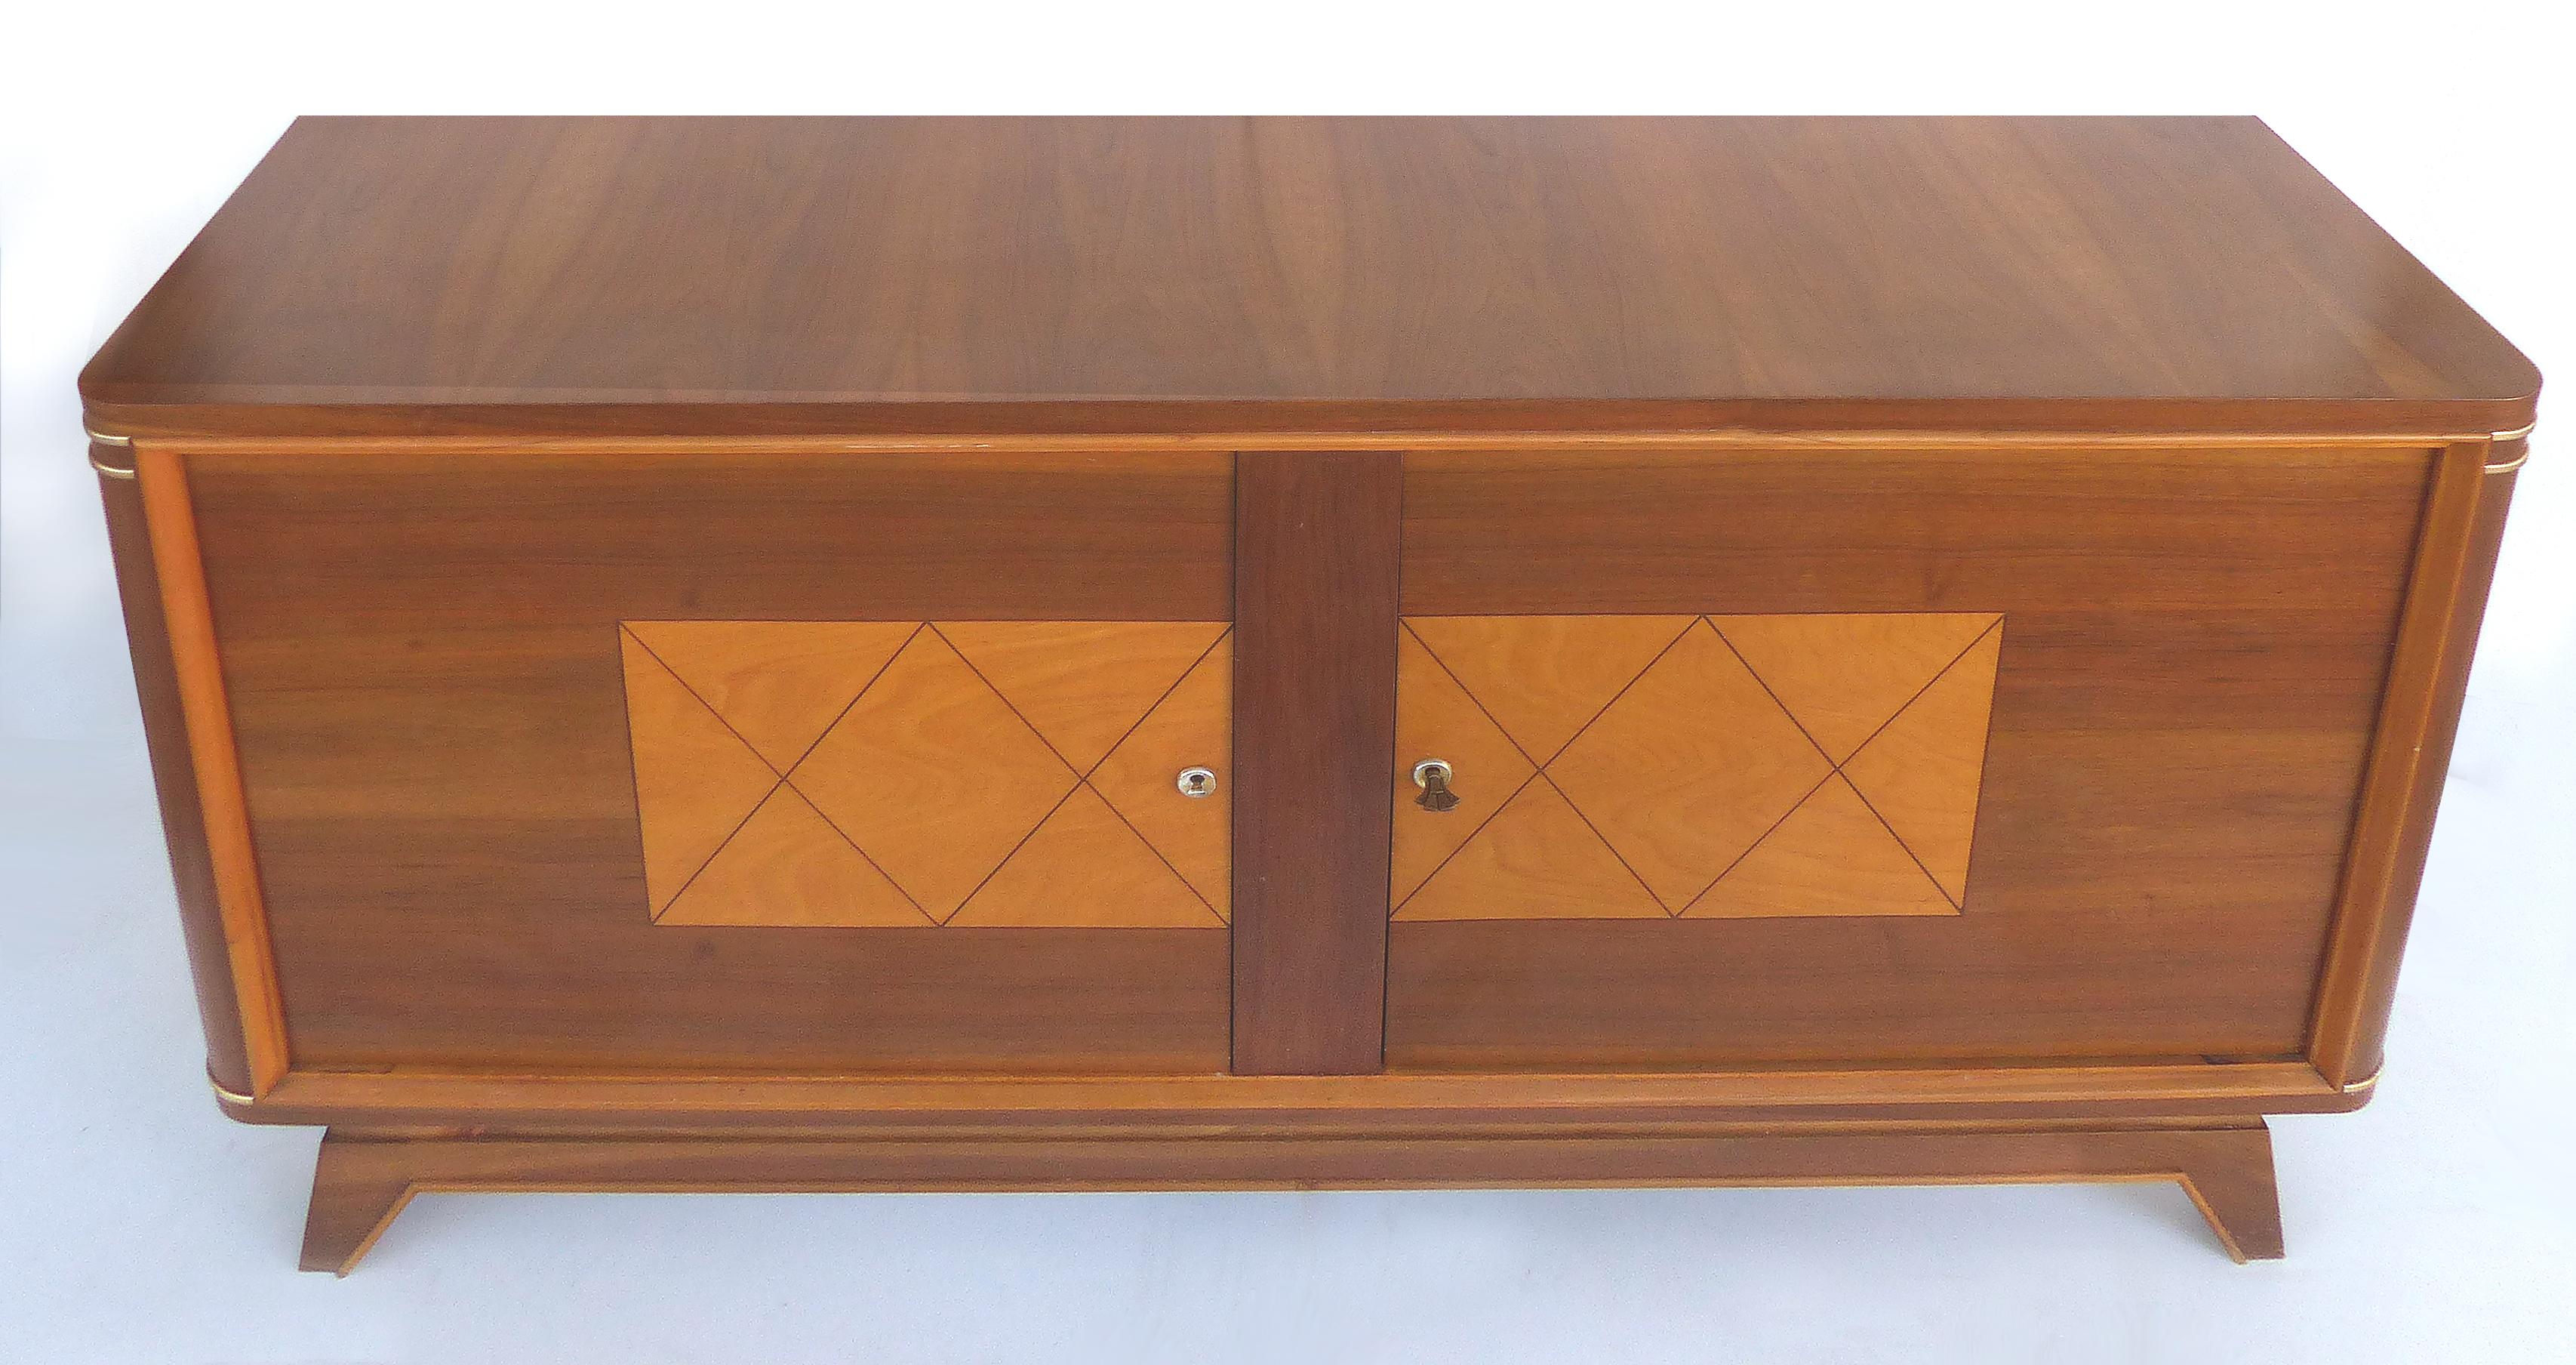 American Wooden Art Deco Credenza with Two-Tone Pattern Doors